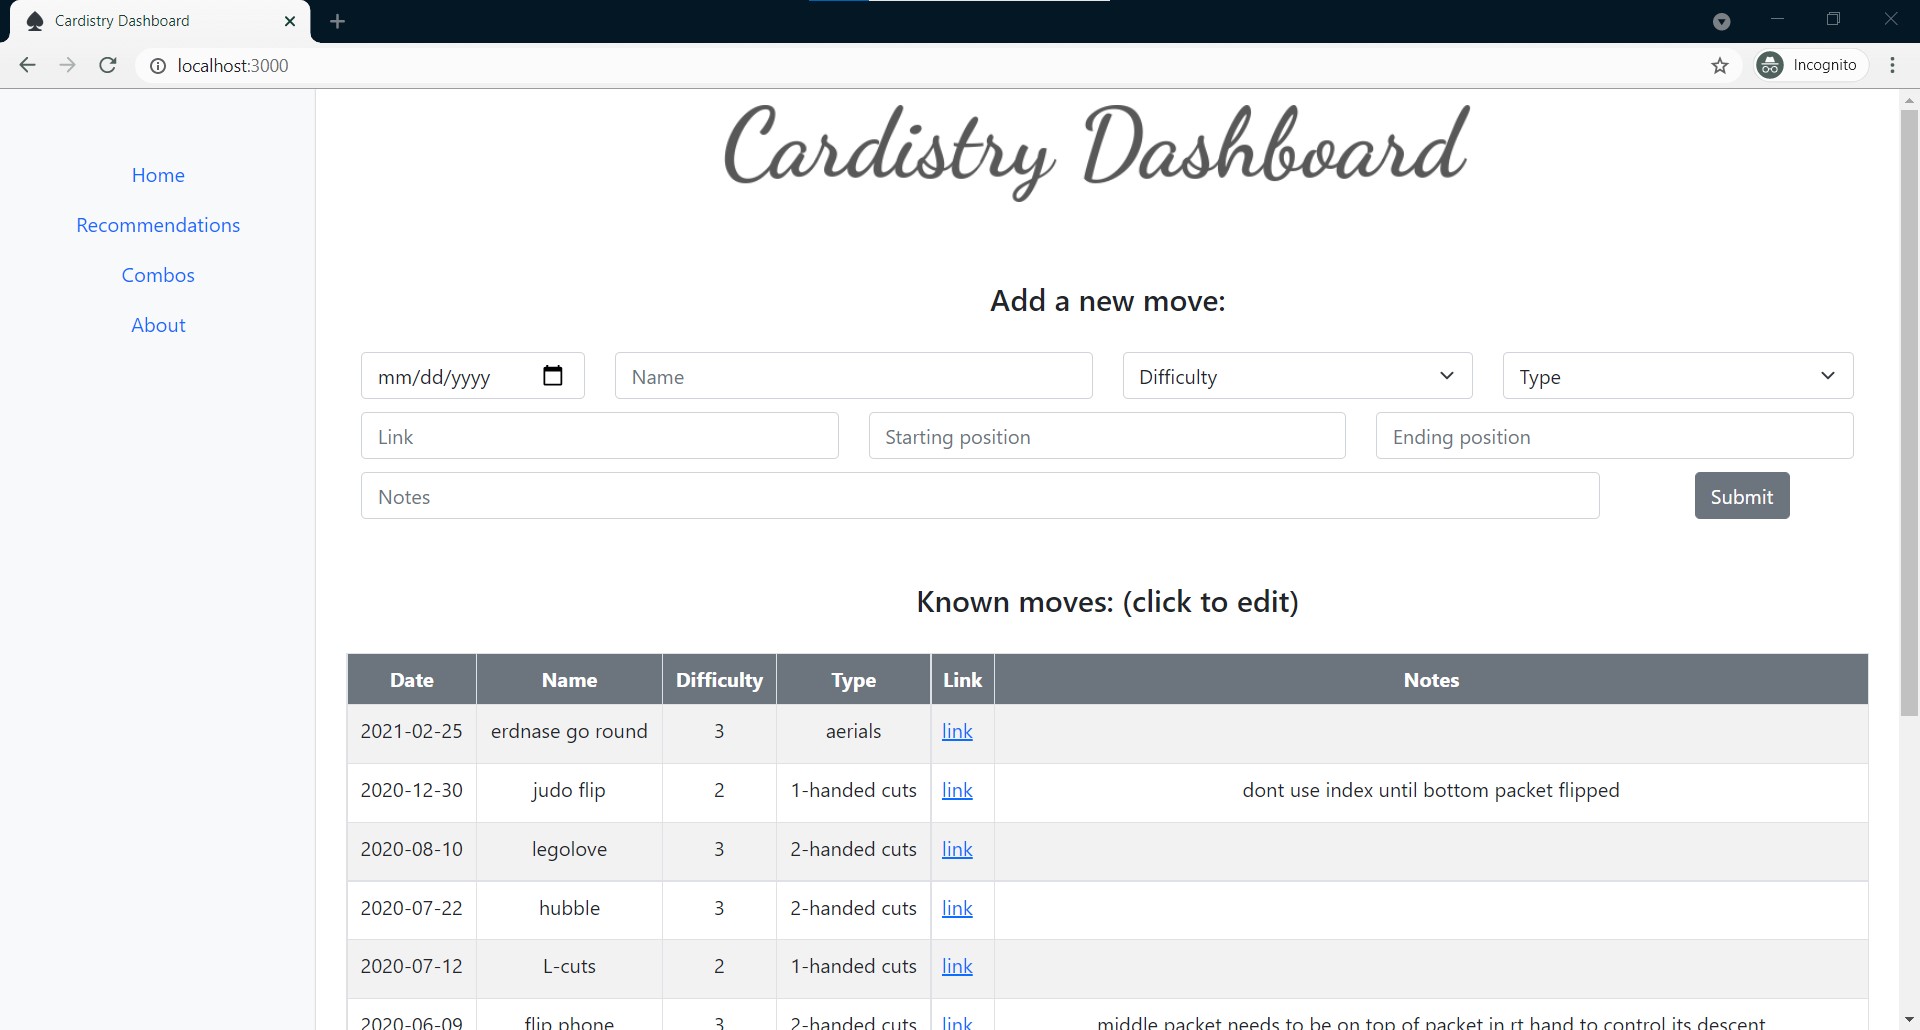 Cardistry dashboard project